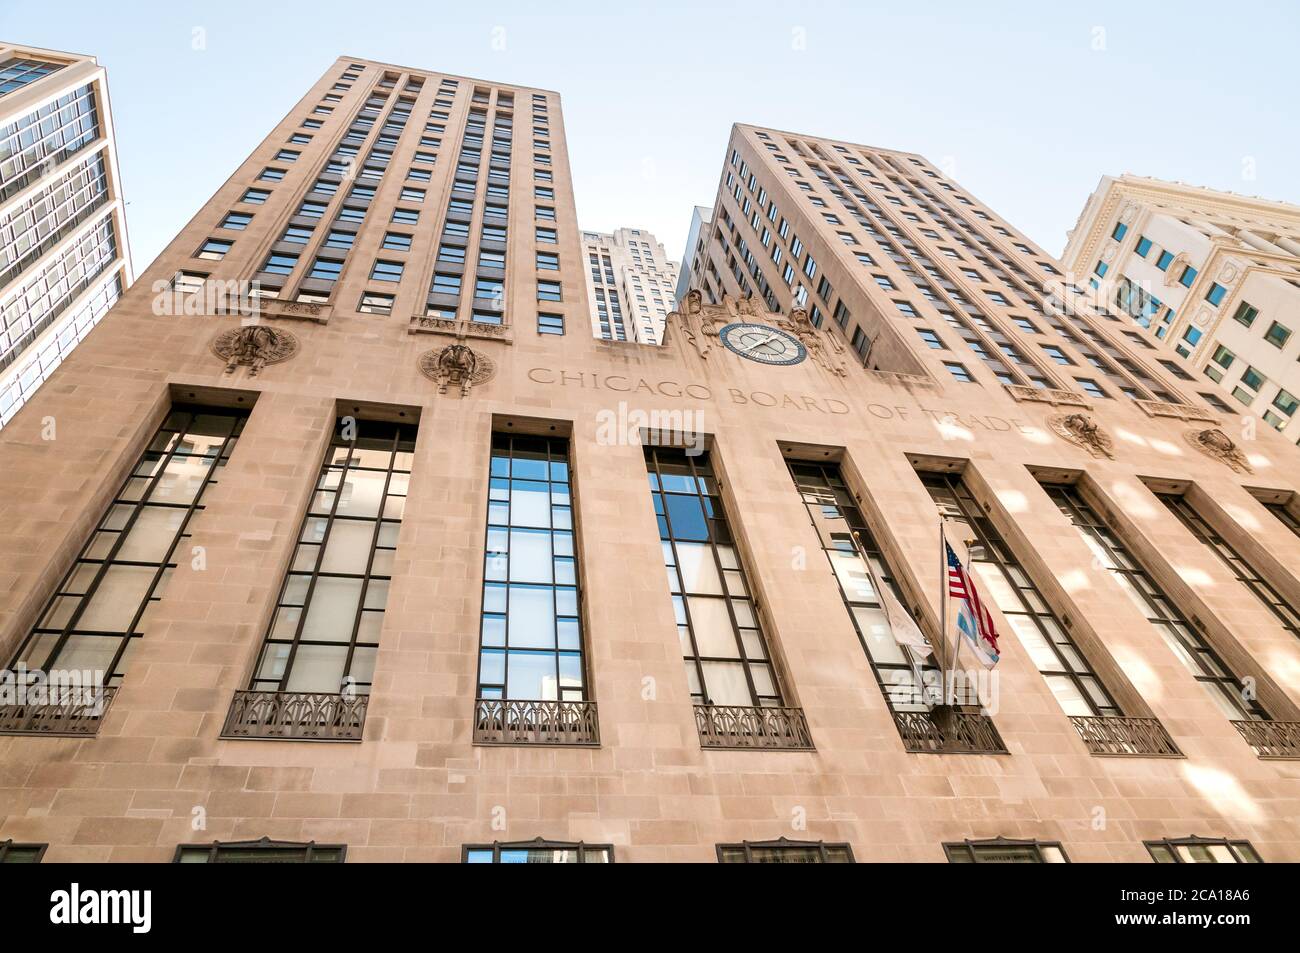 Chicago, Illinois, USA - April 23, 2012: Facade of Chicago Board of Trade Building in Chicago downtown. Stock Photo